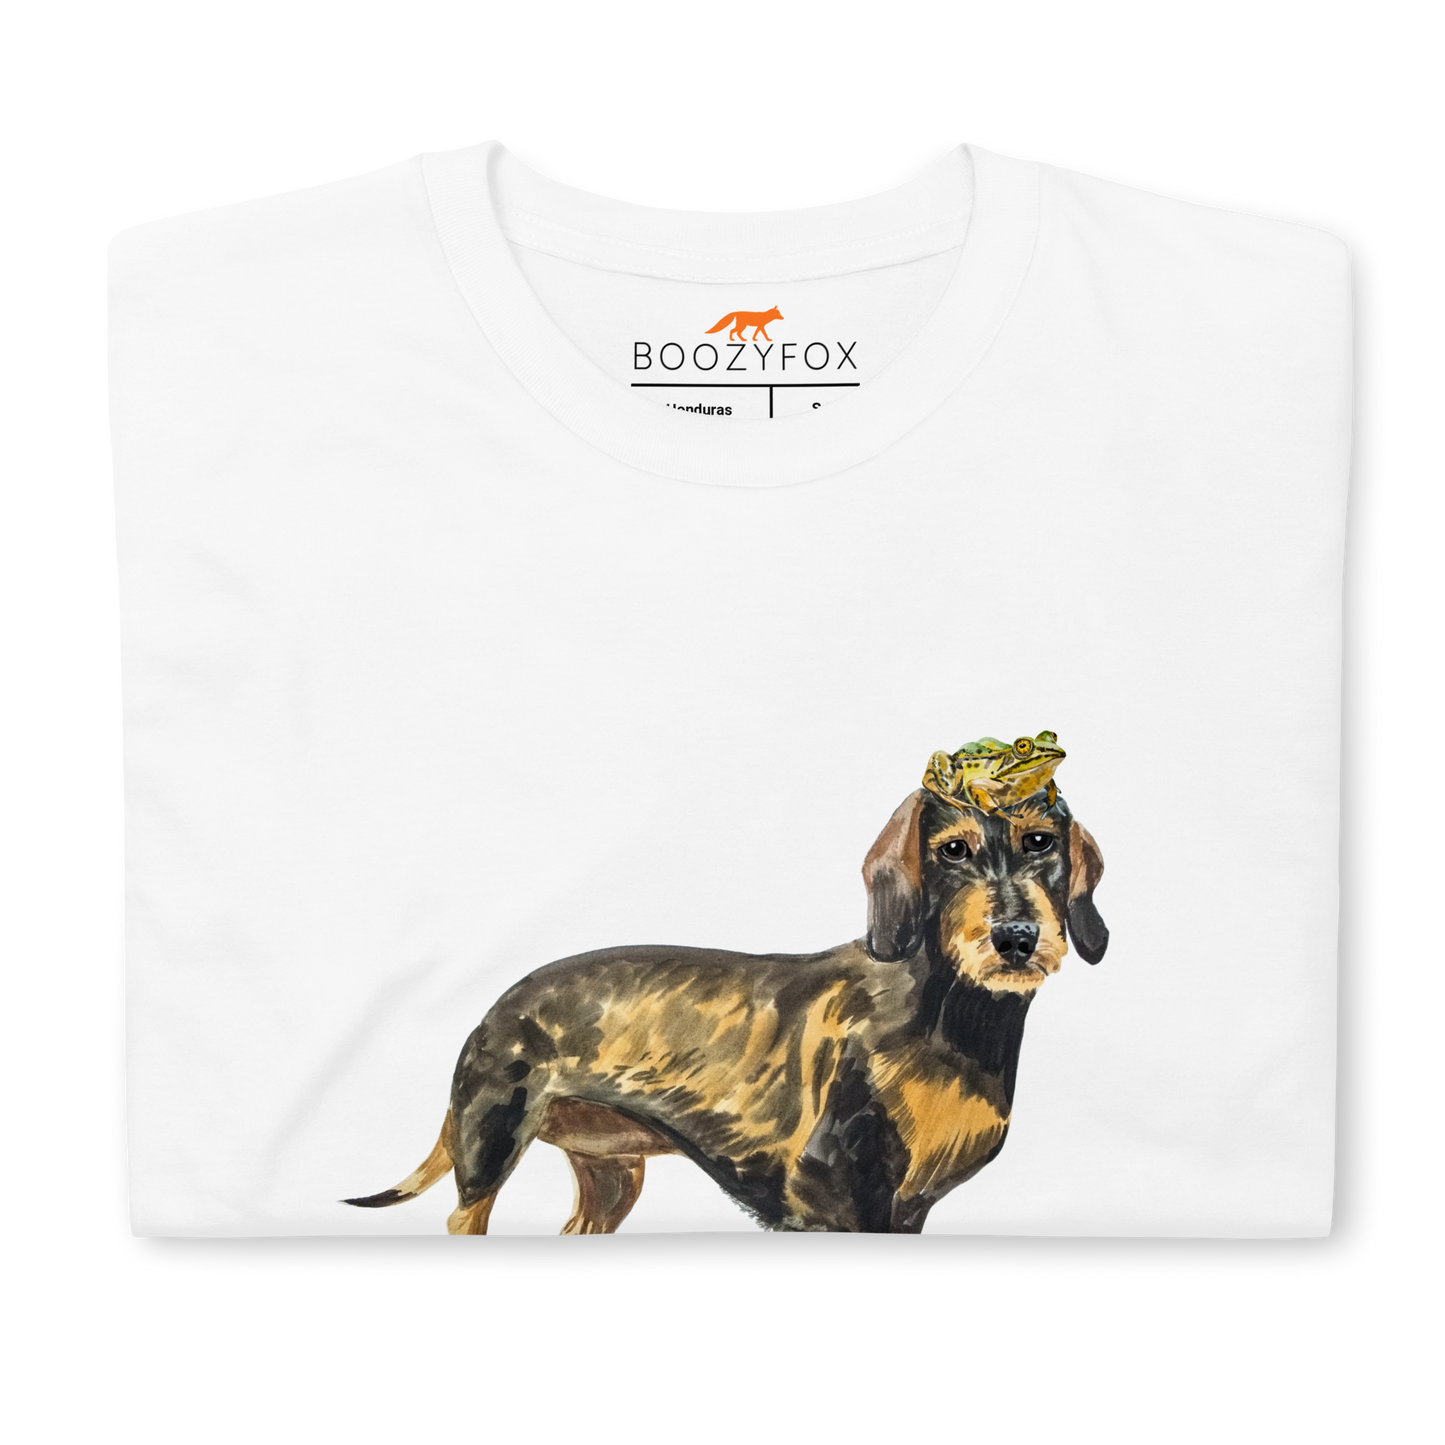 Front Details of a White Dachshund T-Shirt featuring an adorable Frog on a Dachshund's Head graphic on the chest - Cute Graphic Dachshund T-Shirts - Boozy Fox